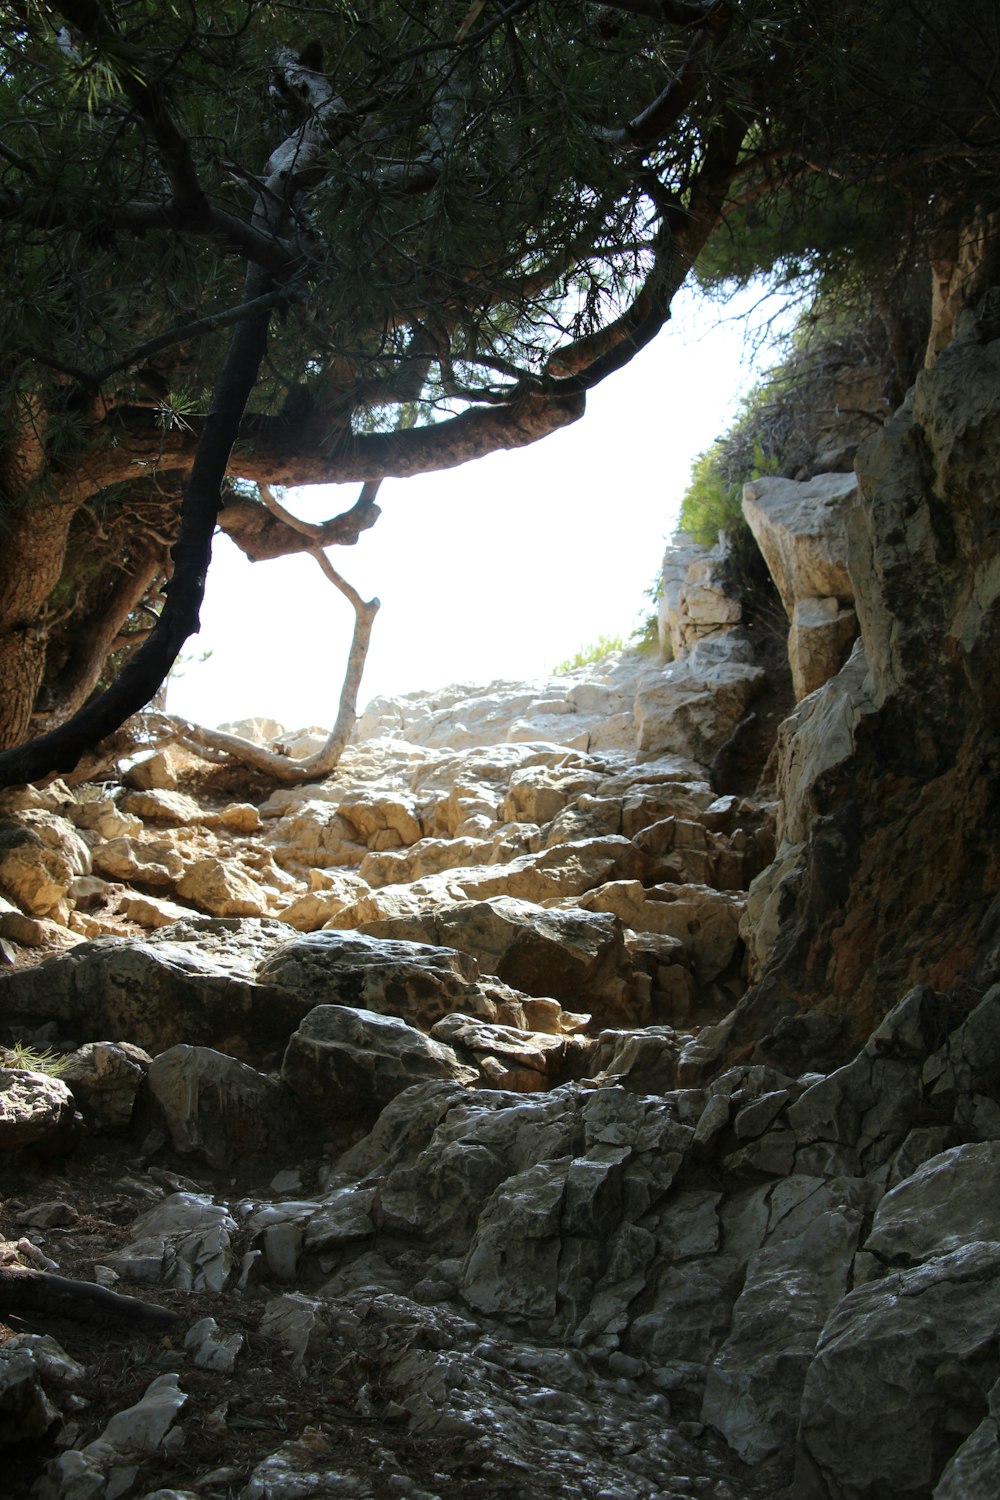 a rocky area with trees